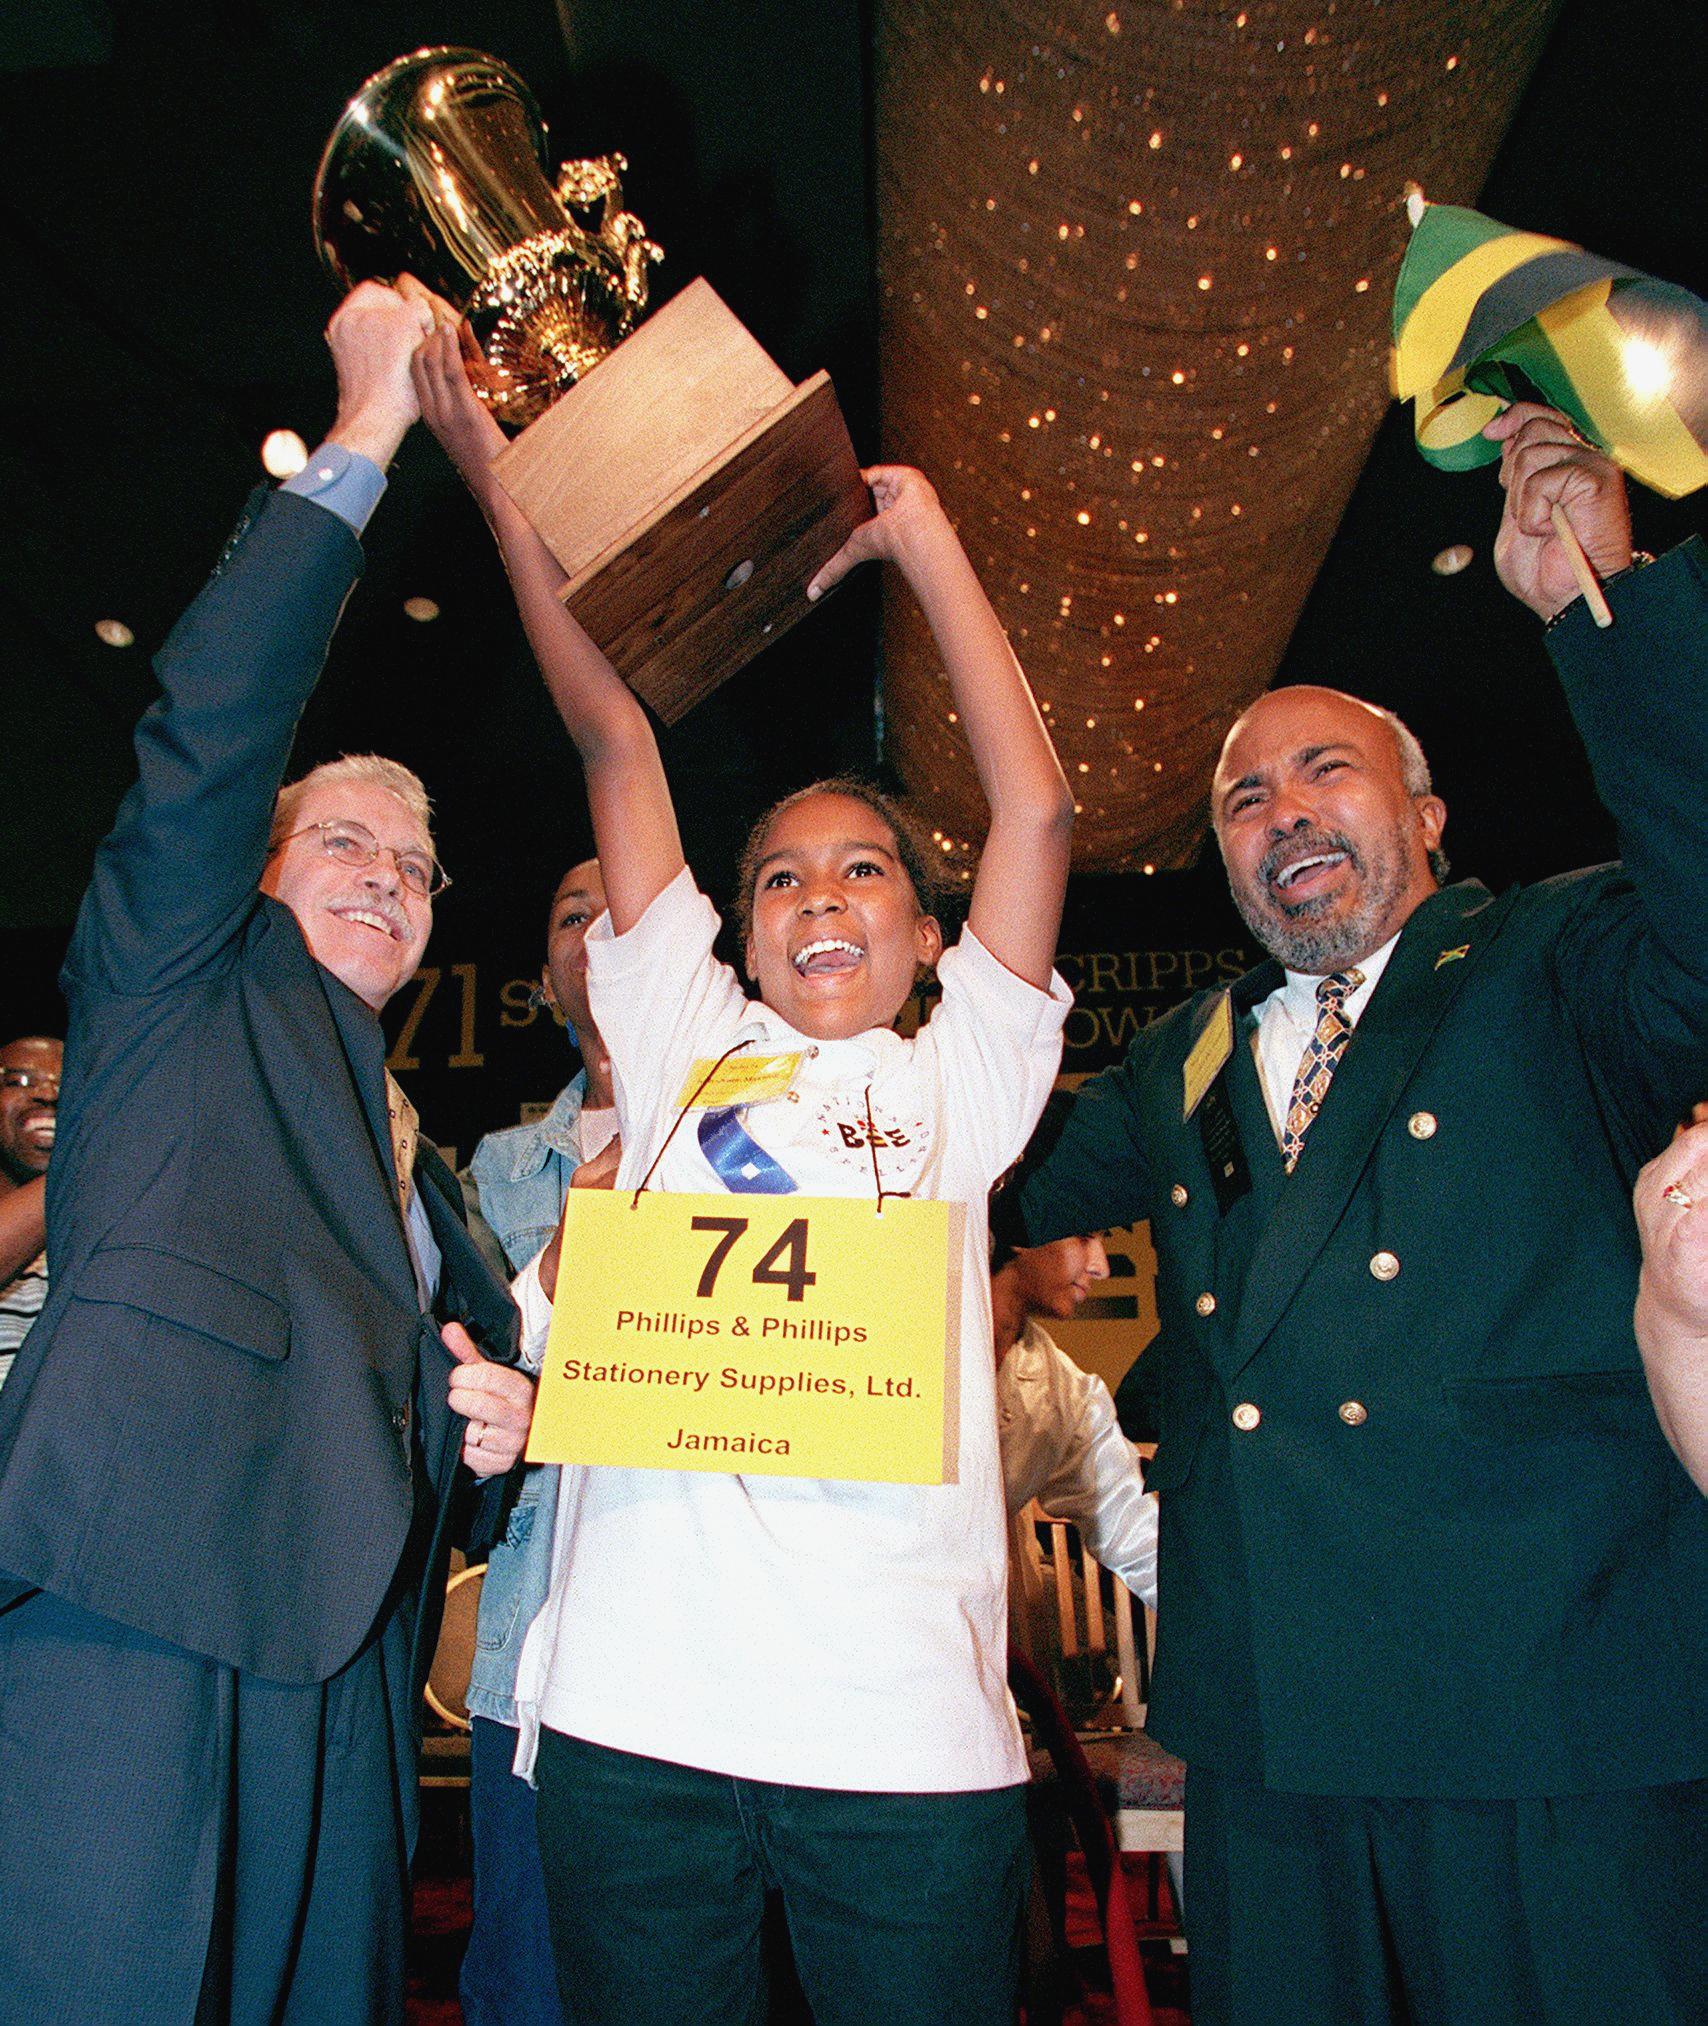 Jody Anne Maxwell, 12, from Kingston, Jamaica, wins the 1998 Scripps National Spelling Bee